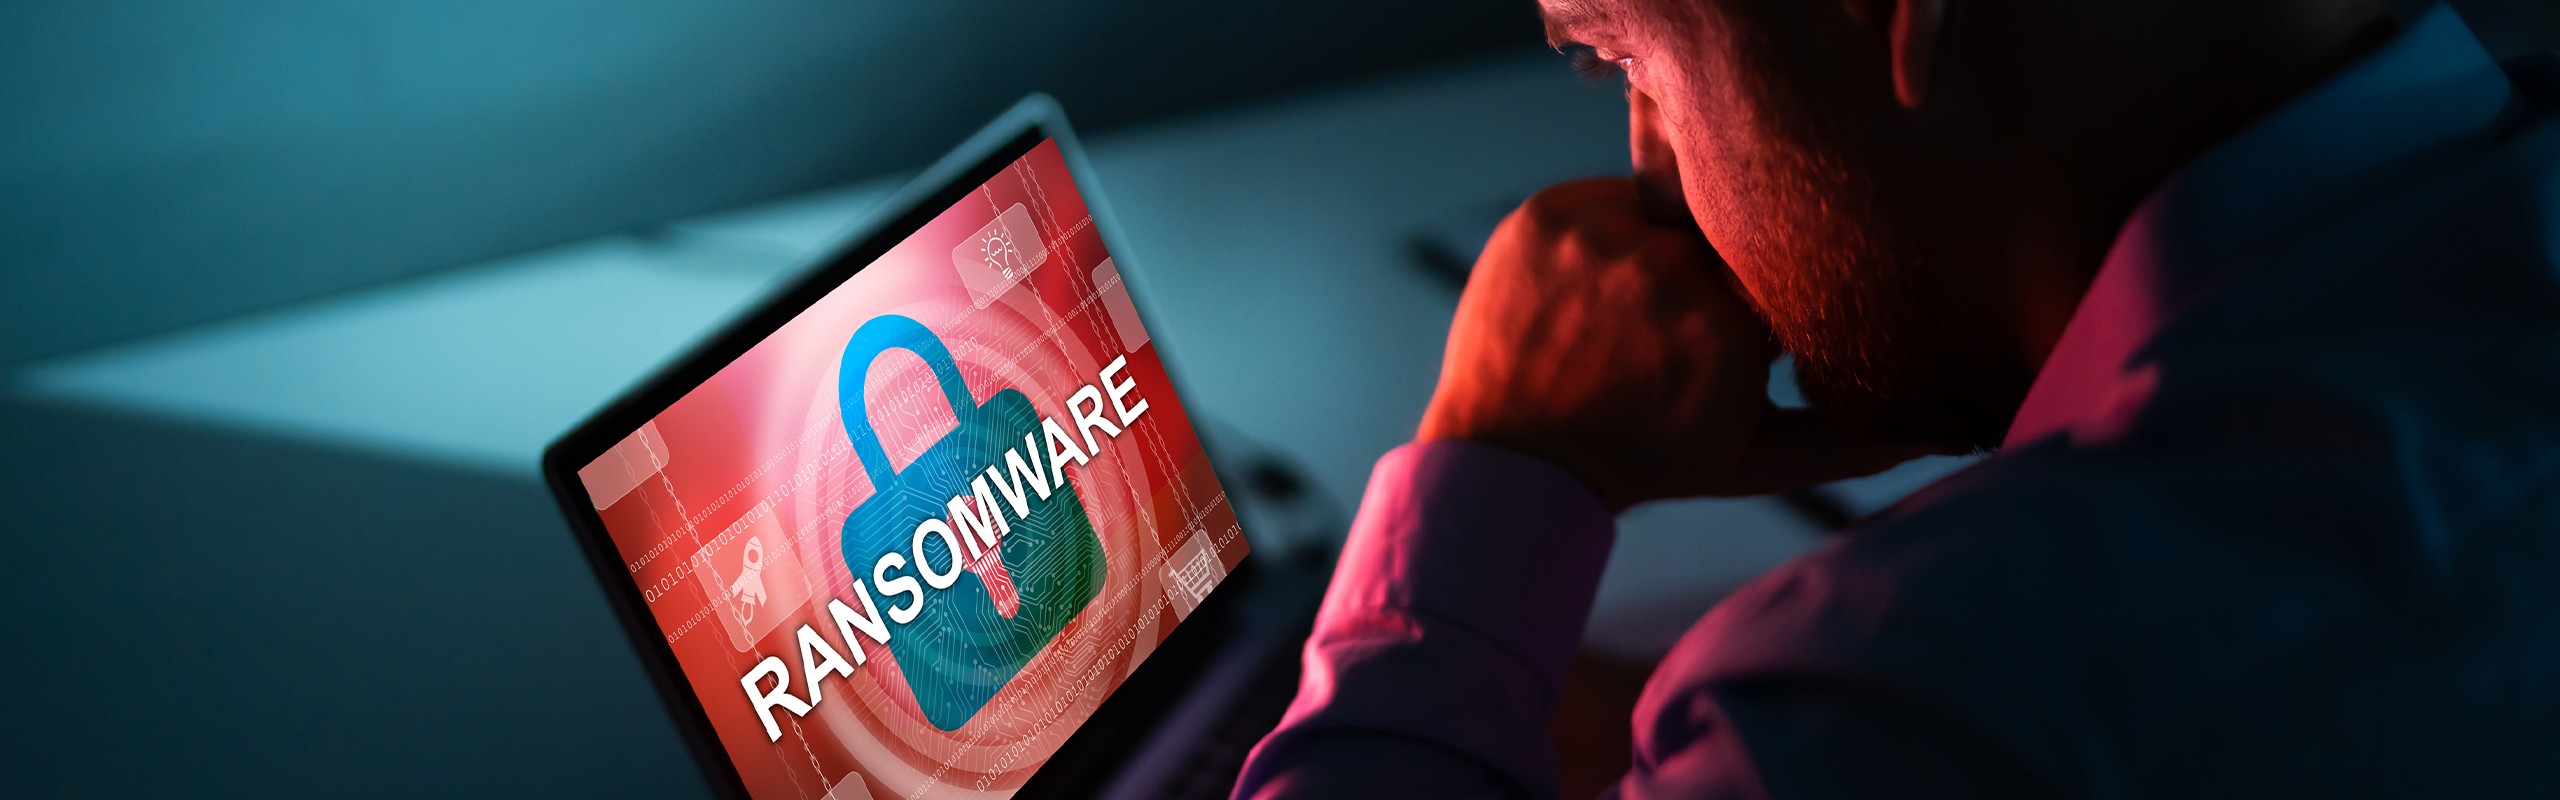 Public sector ransomware